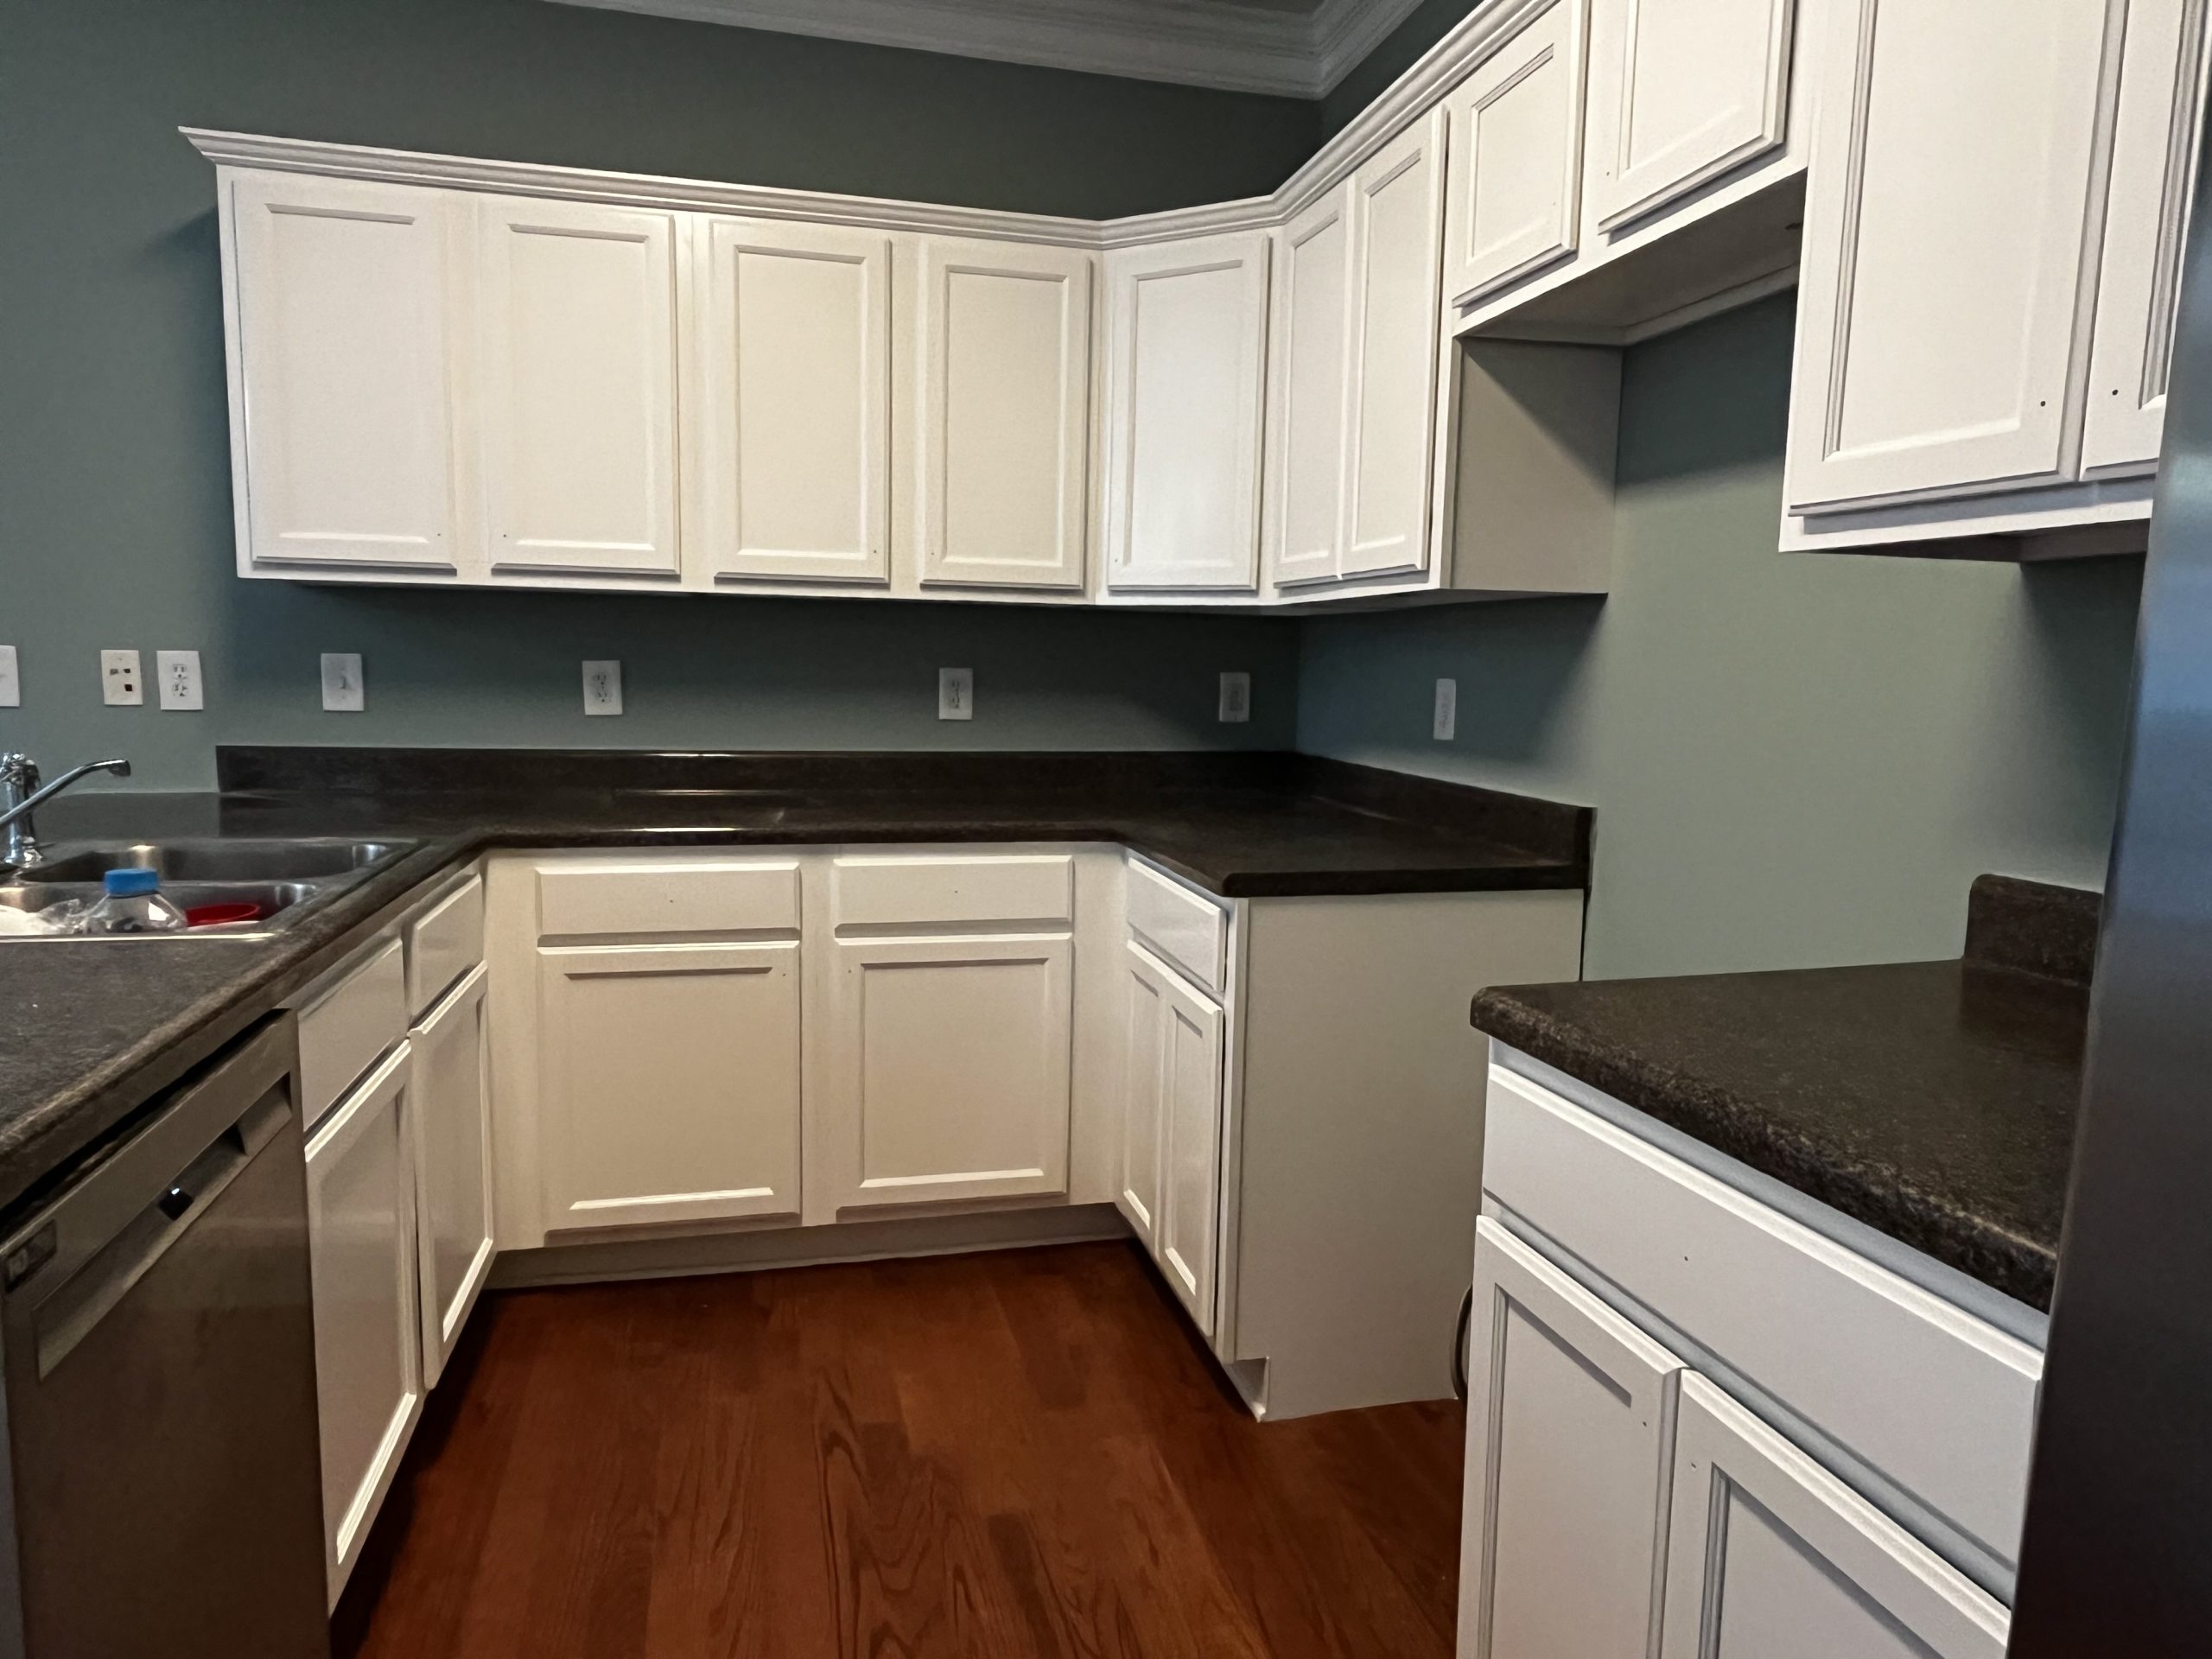 Kitchen in Tyrone, GA, after completed residential interior and kitchen cabinet painting project by CertaPro Painters of Peachtree City/Coweta County, GA - Angle 2